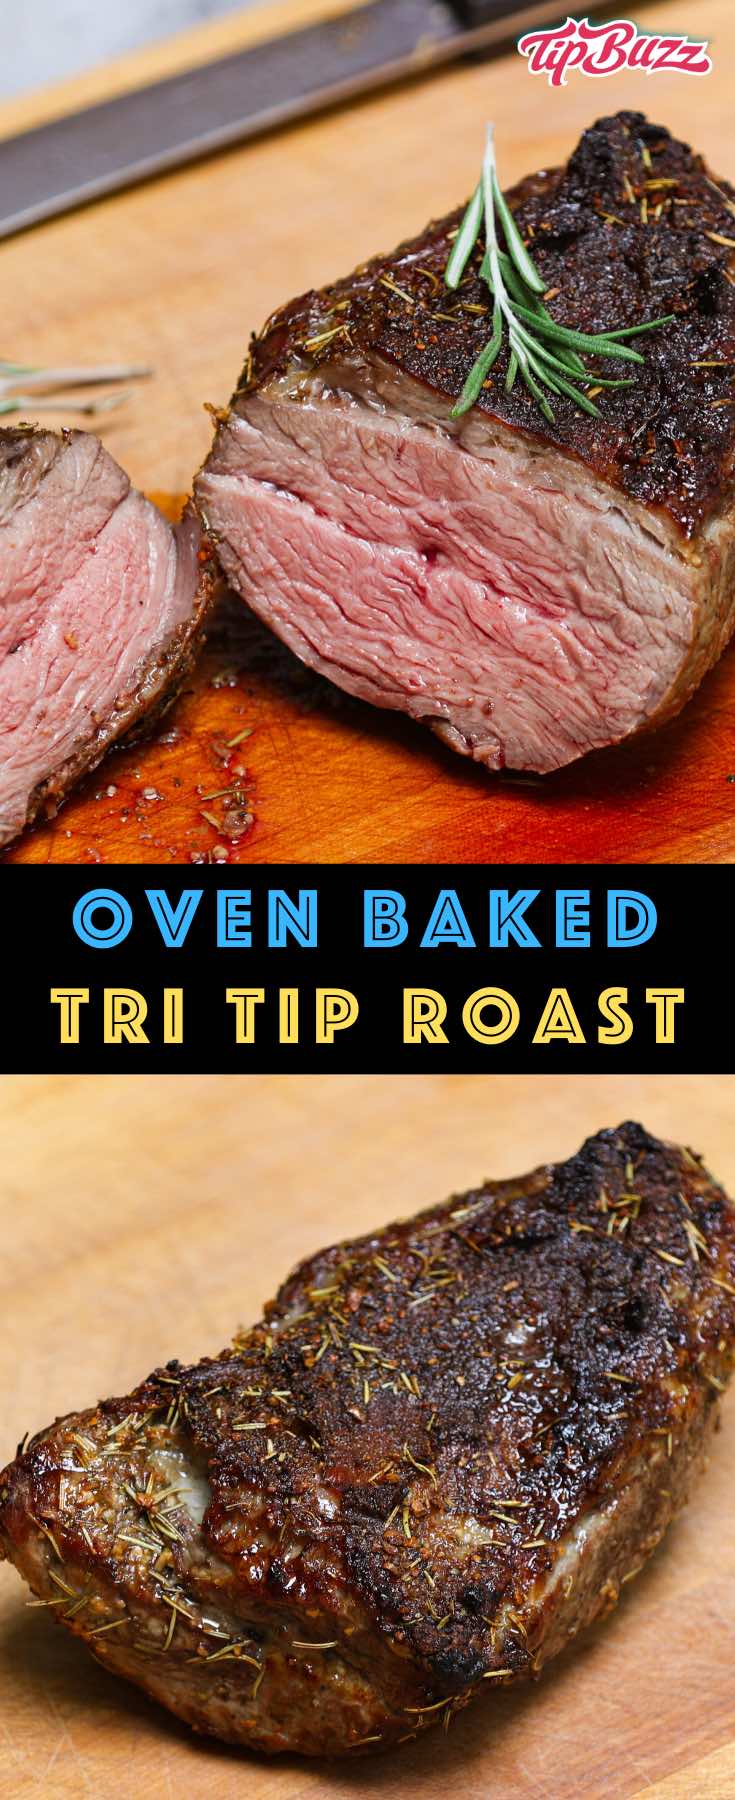 Tri Tip Roast Santa Maria style with a delicious crust and juicy beef! It's easy to make in the oven for dinner with friends or a holiday feast. Just a few simple seasonings to produce amazing flavor! #tritip #tritiproast